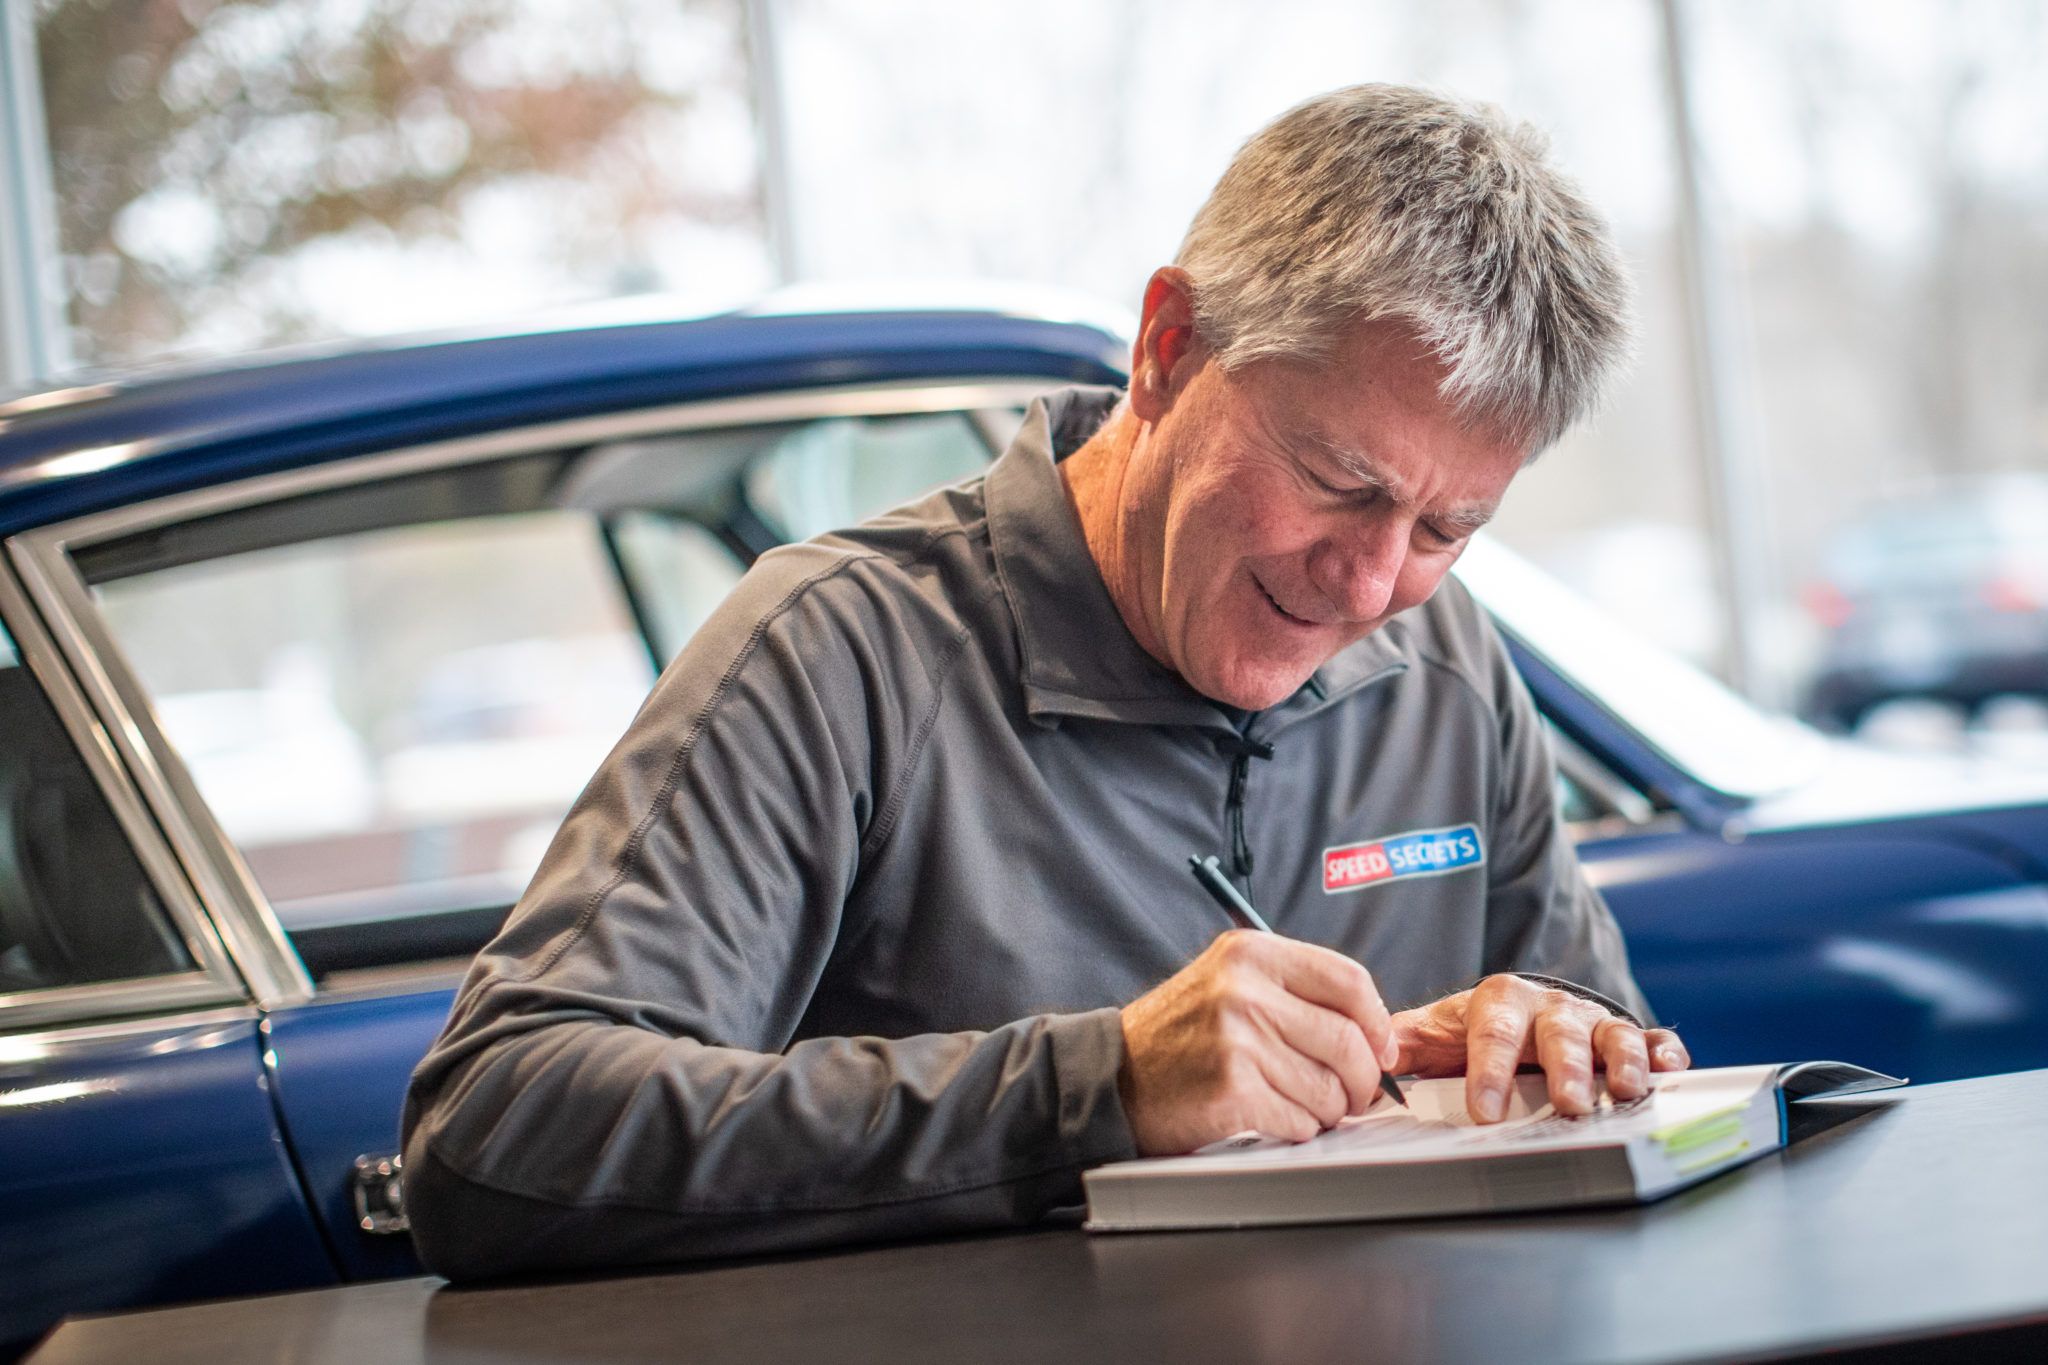 Ross Bentley smiling, signing a SpeedSecrets book at a table, in front of a classic sports car